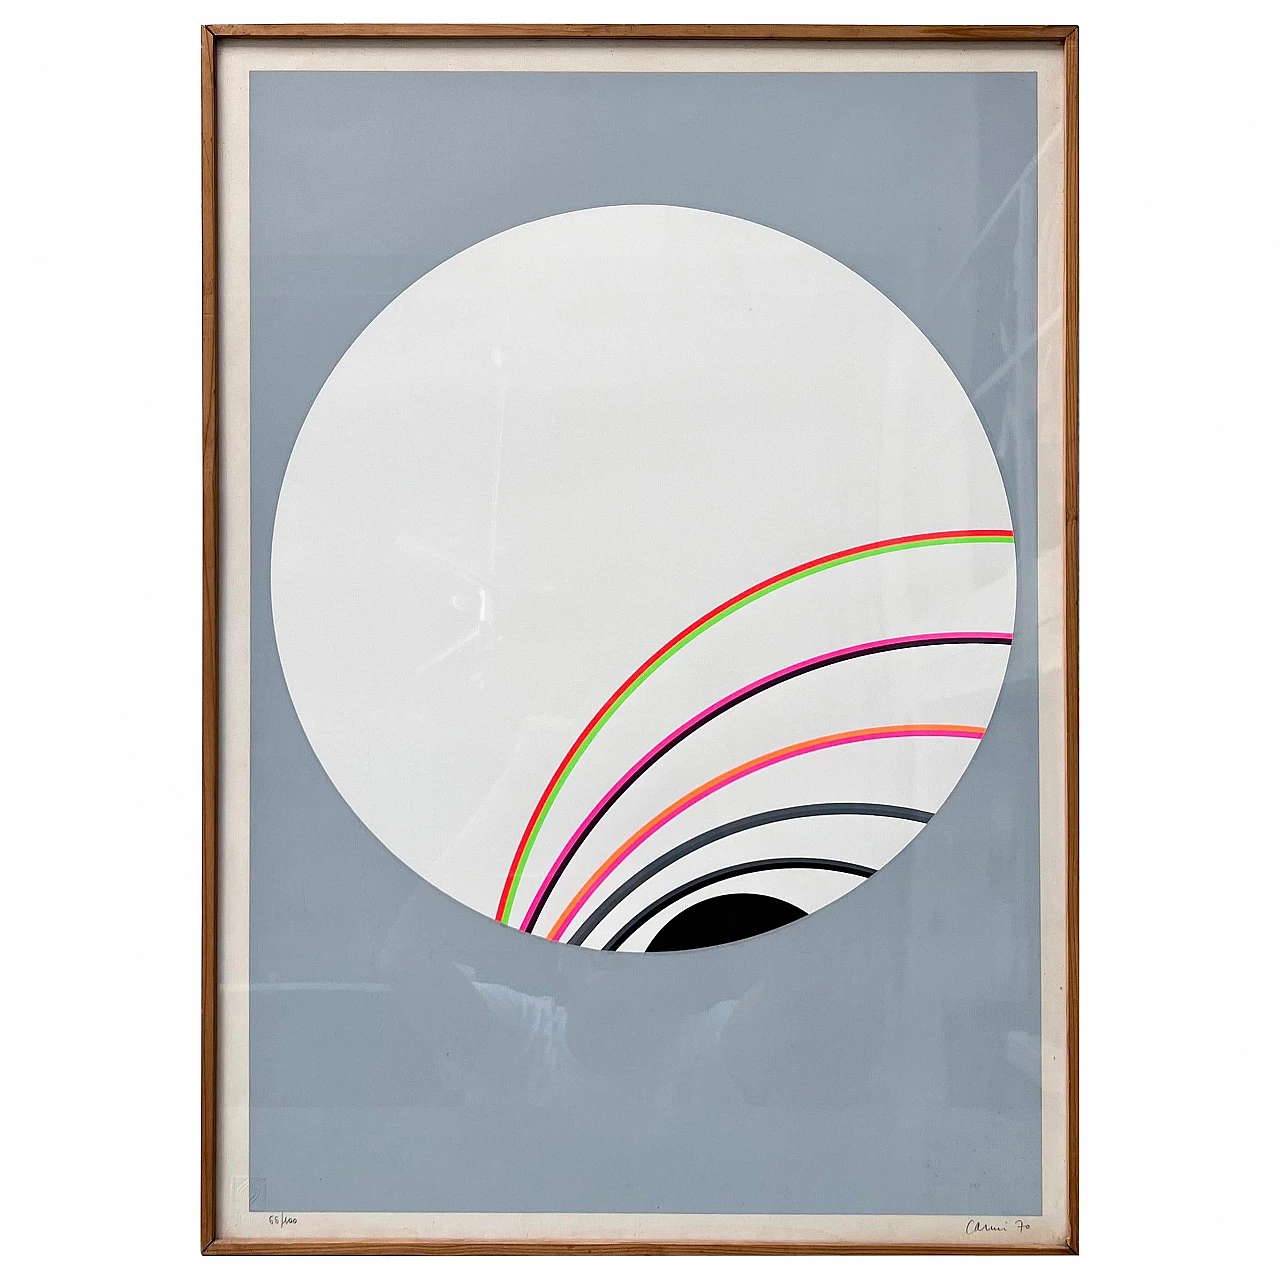 Eugenio Carmi, abstract composition, painting on paper, 1970 1